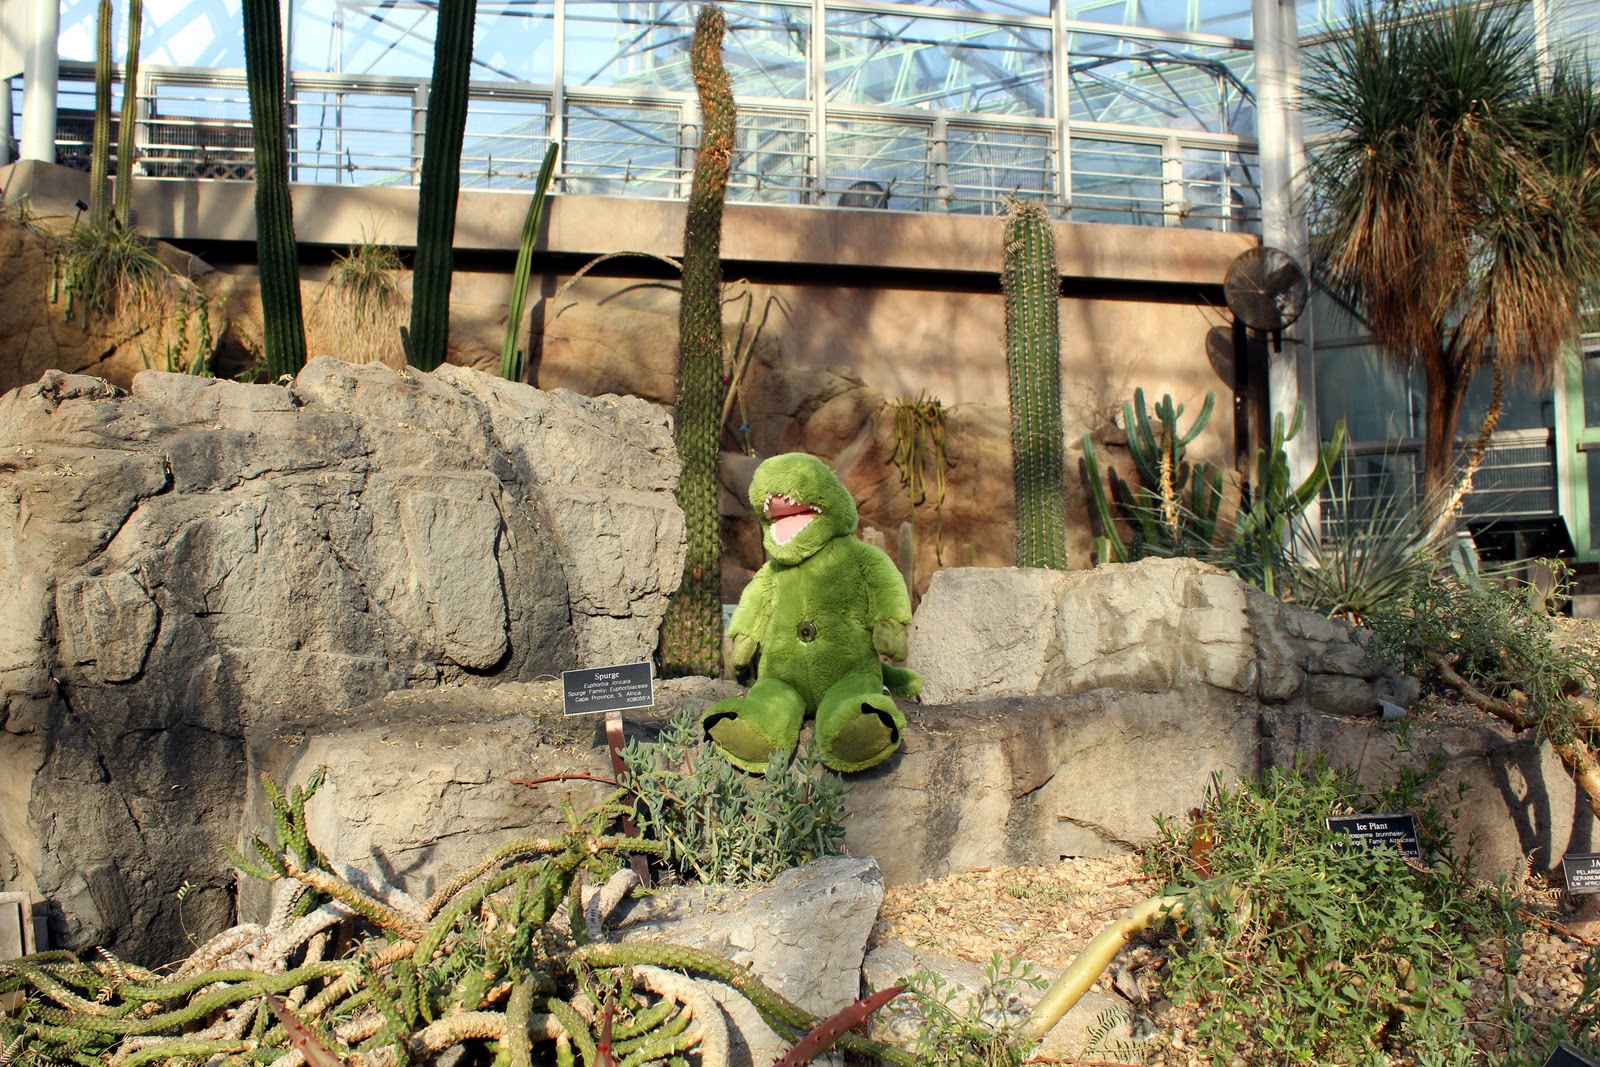 T-Rex NYC: A "Winter" Weekday at the Brooklyn Botanic Garden